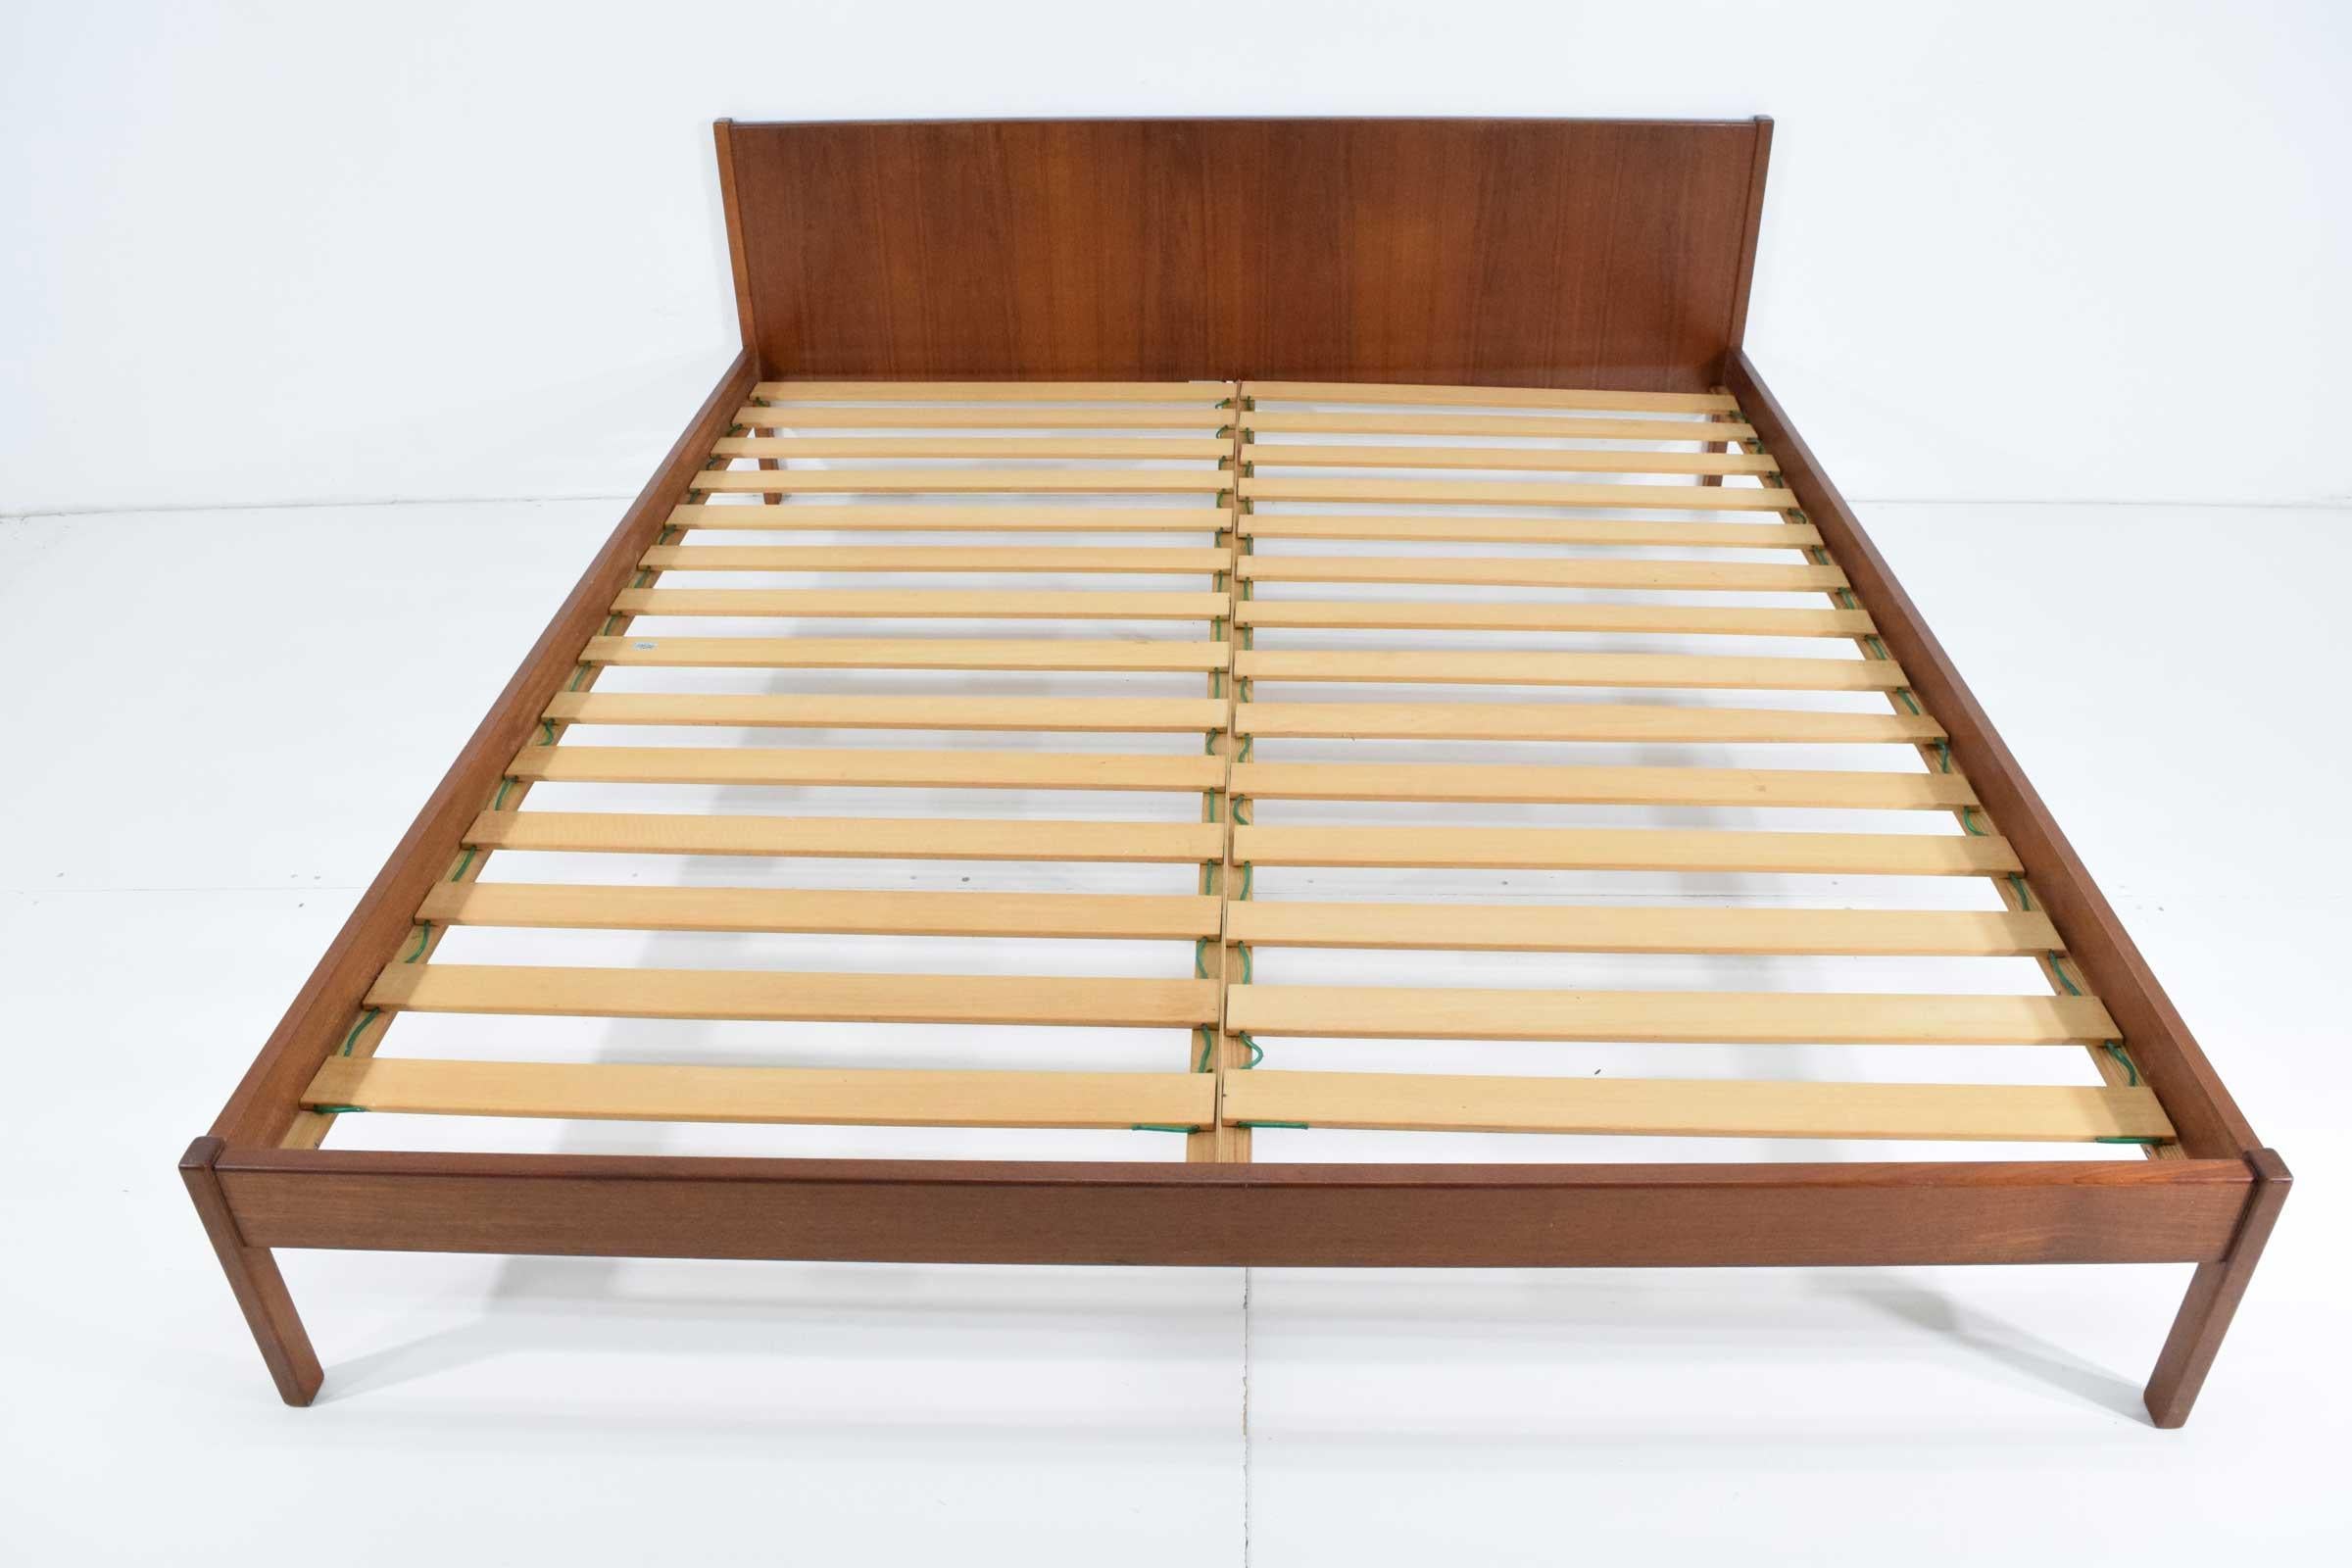 Beautiful teak bed frame from the 1960s. Includes headboard, footboard and running boards with wood slates.